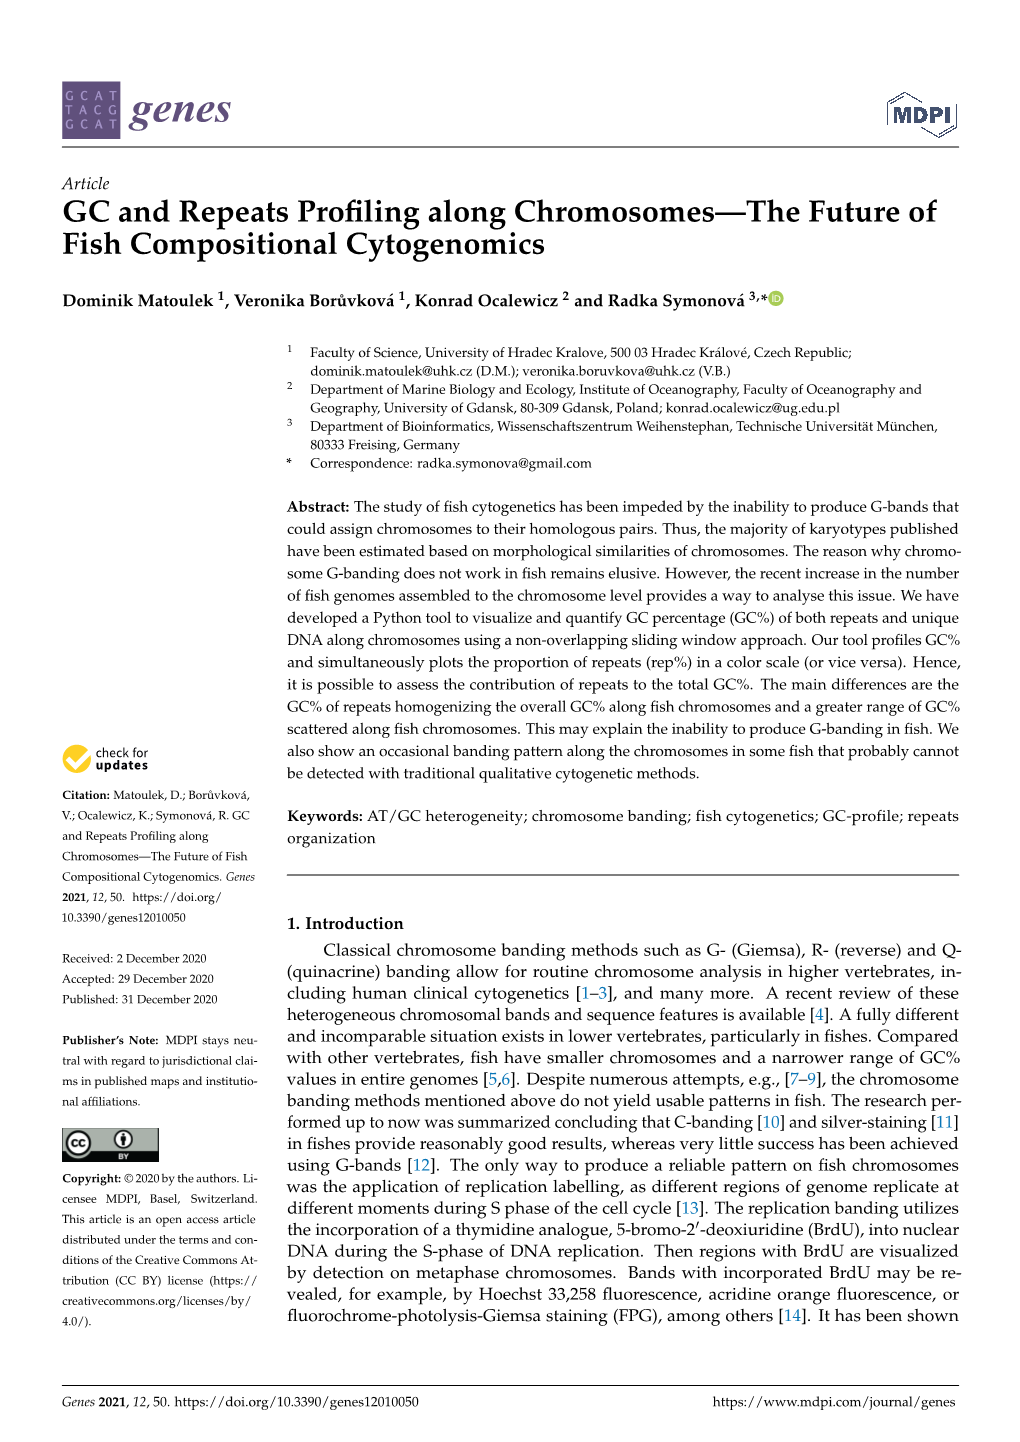 GC and Repeats Profiling Along Chromosomes—The Future of Fish